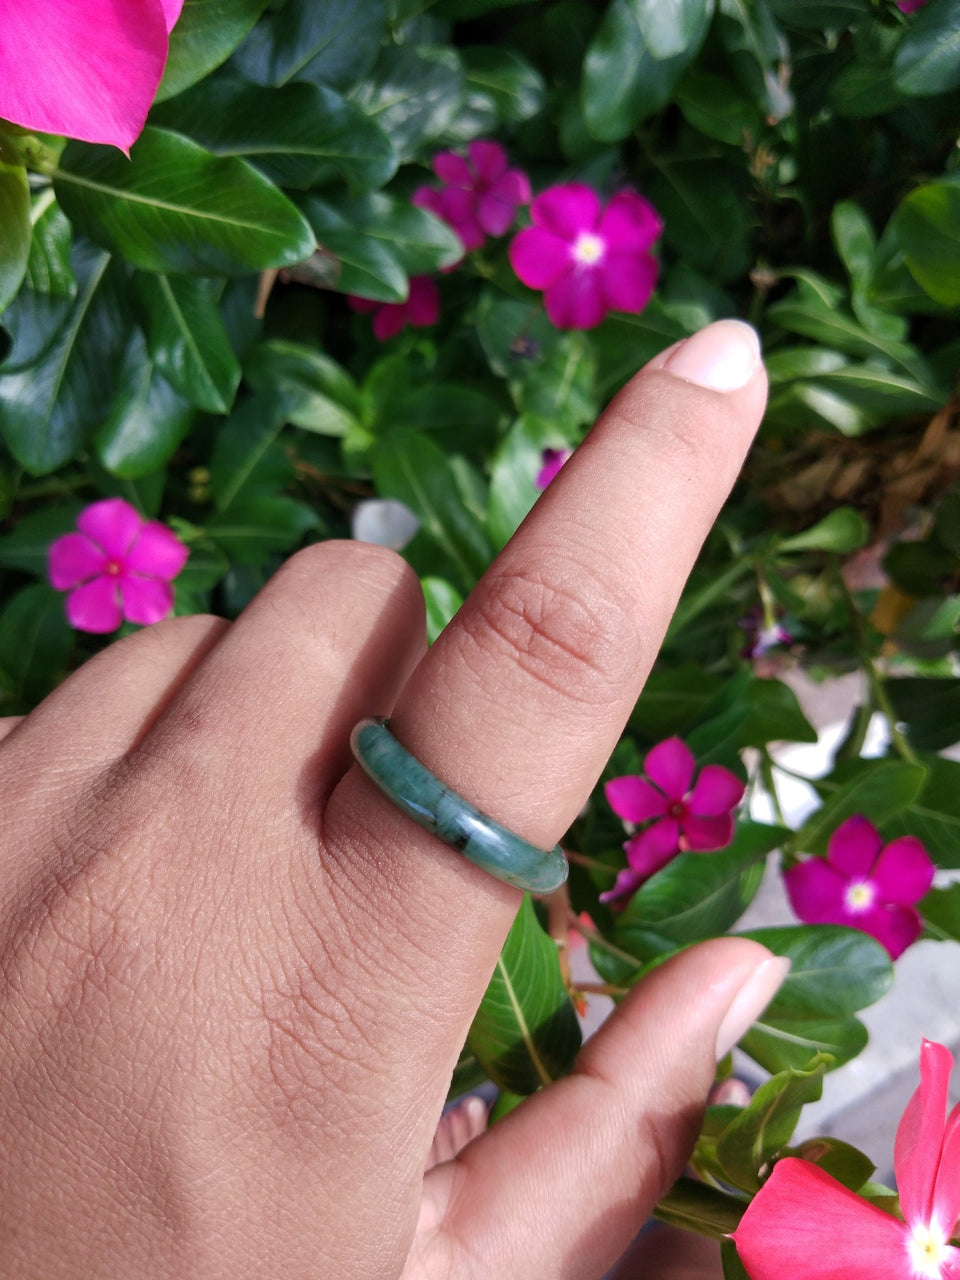 Natural Jadeite Jade ring Thailand jewelry stone mineral size  9.75 US  EB 063